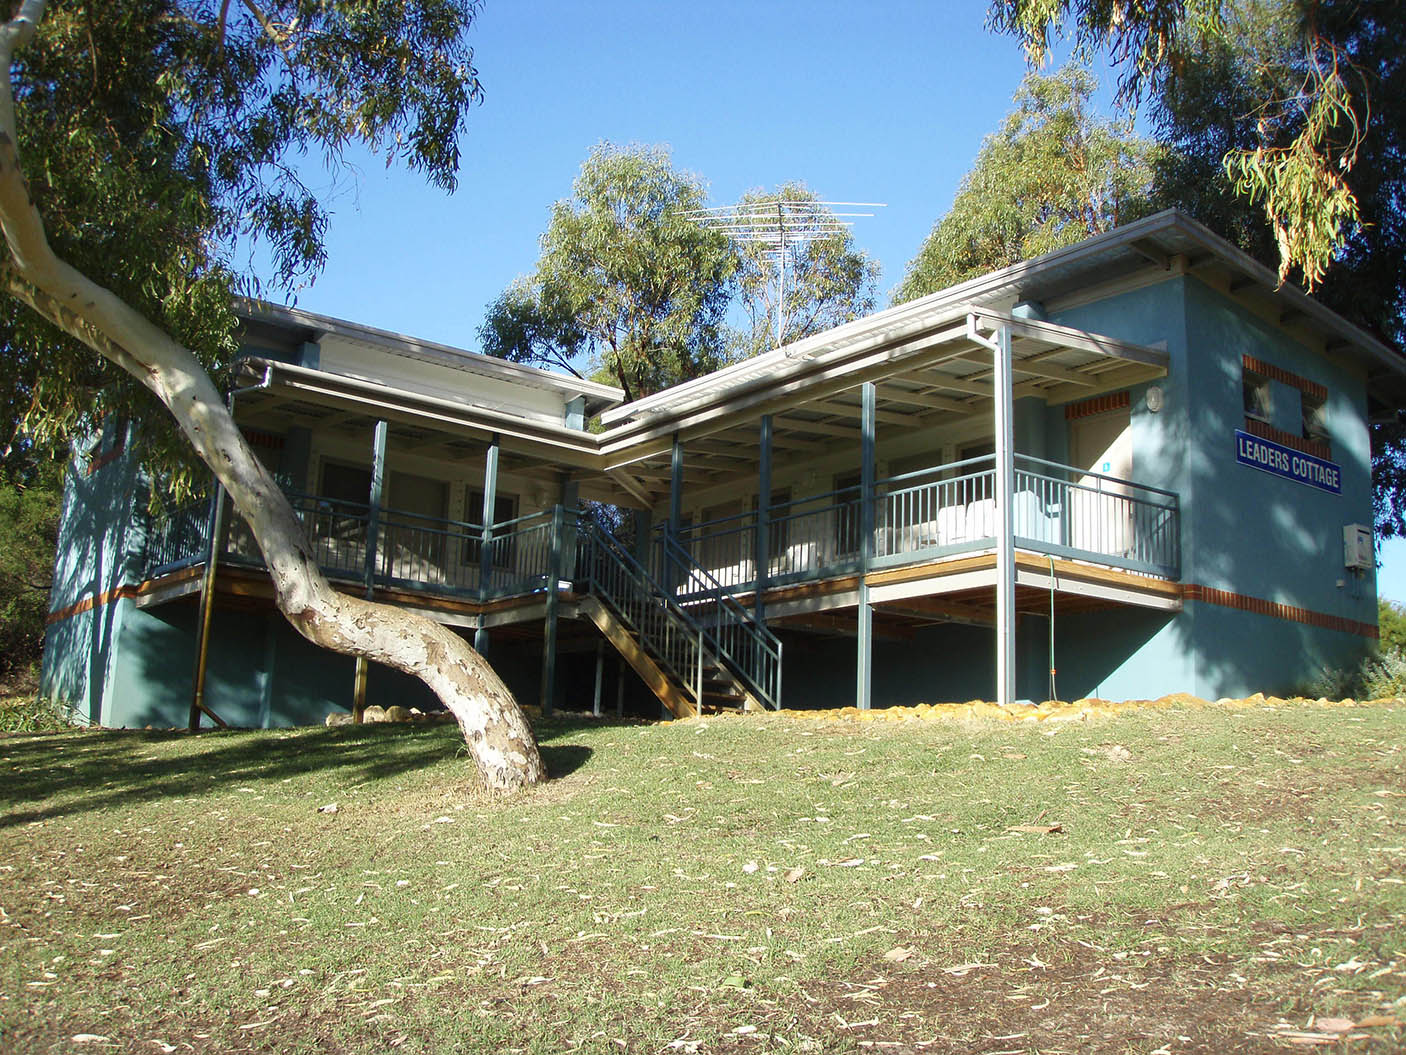 Commodore Leaders Cottage